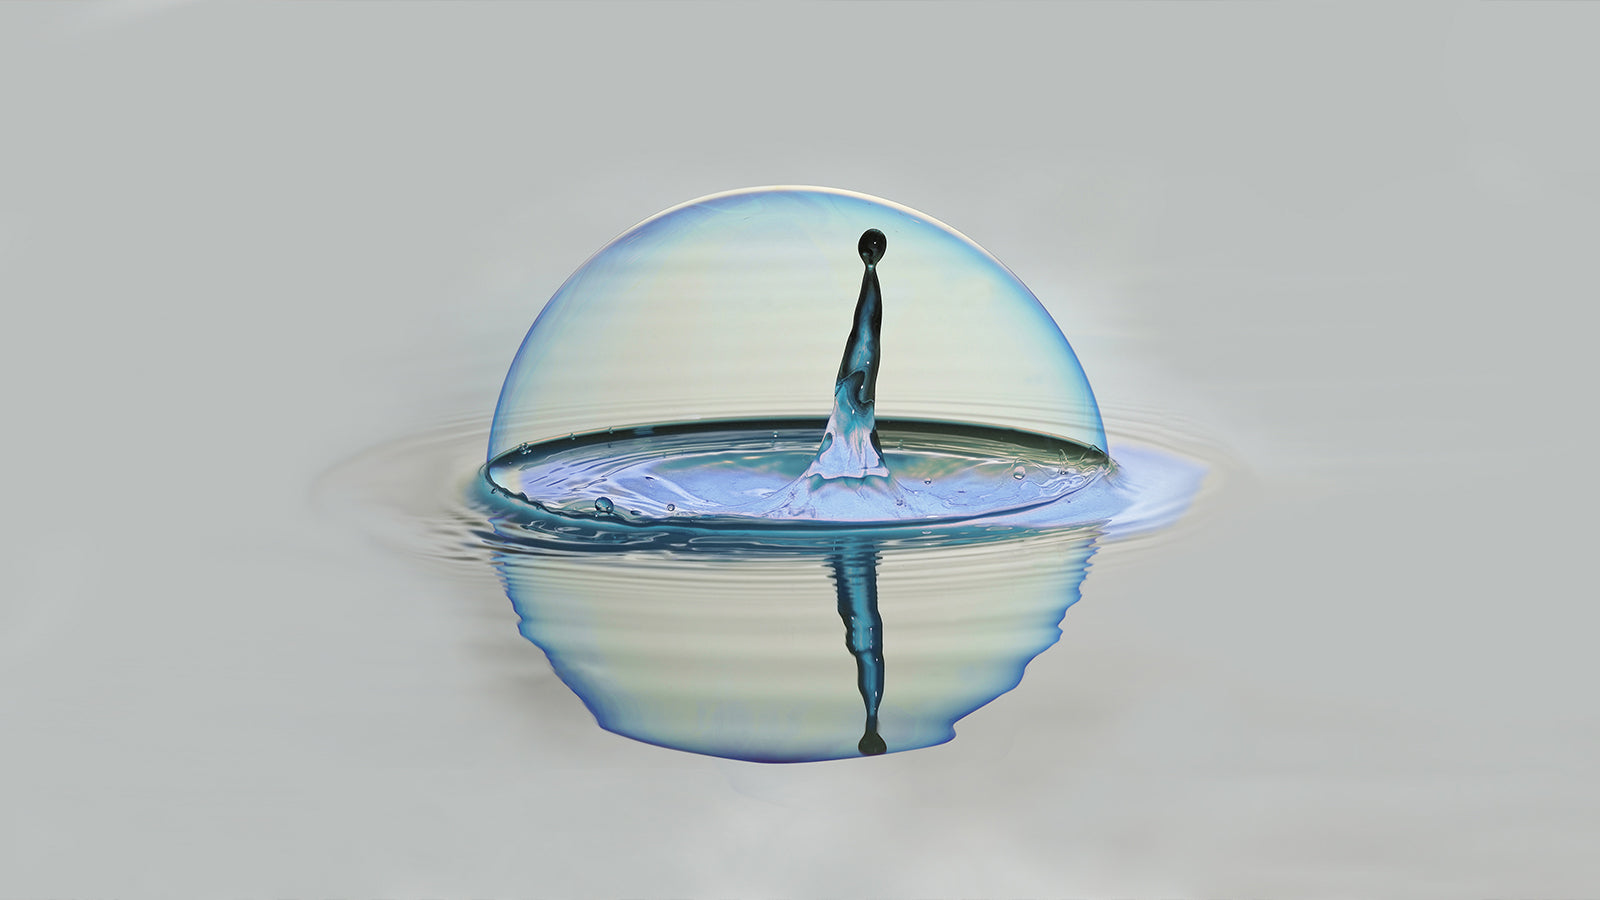 dr. know blog on hernia - water bubble symbolizing hernia bulge 